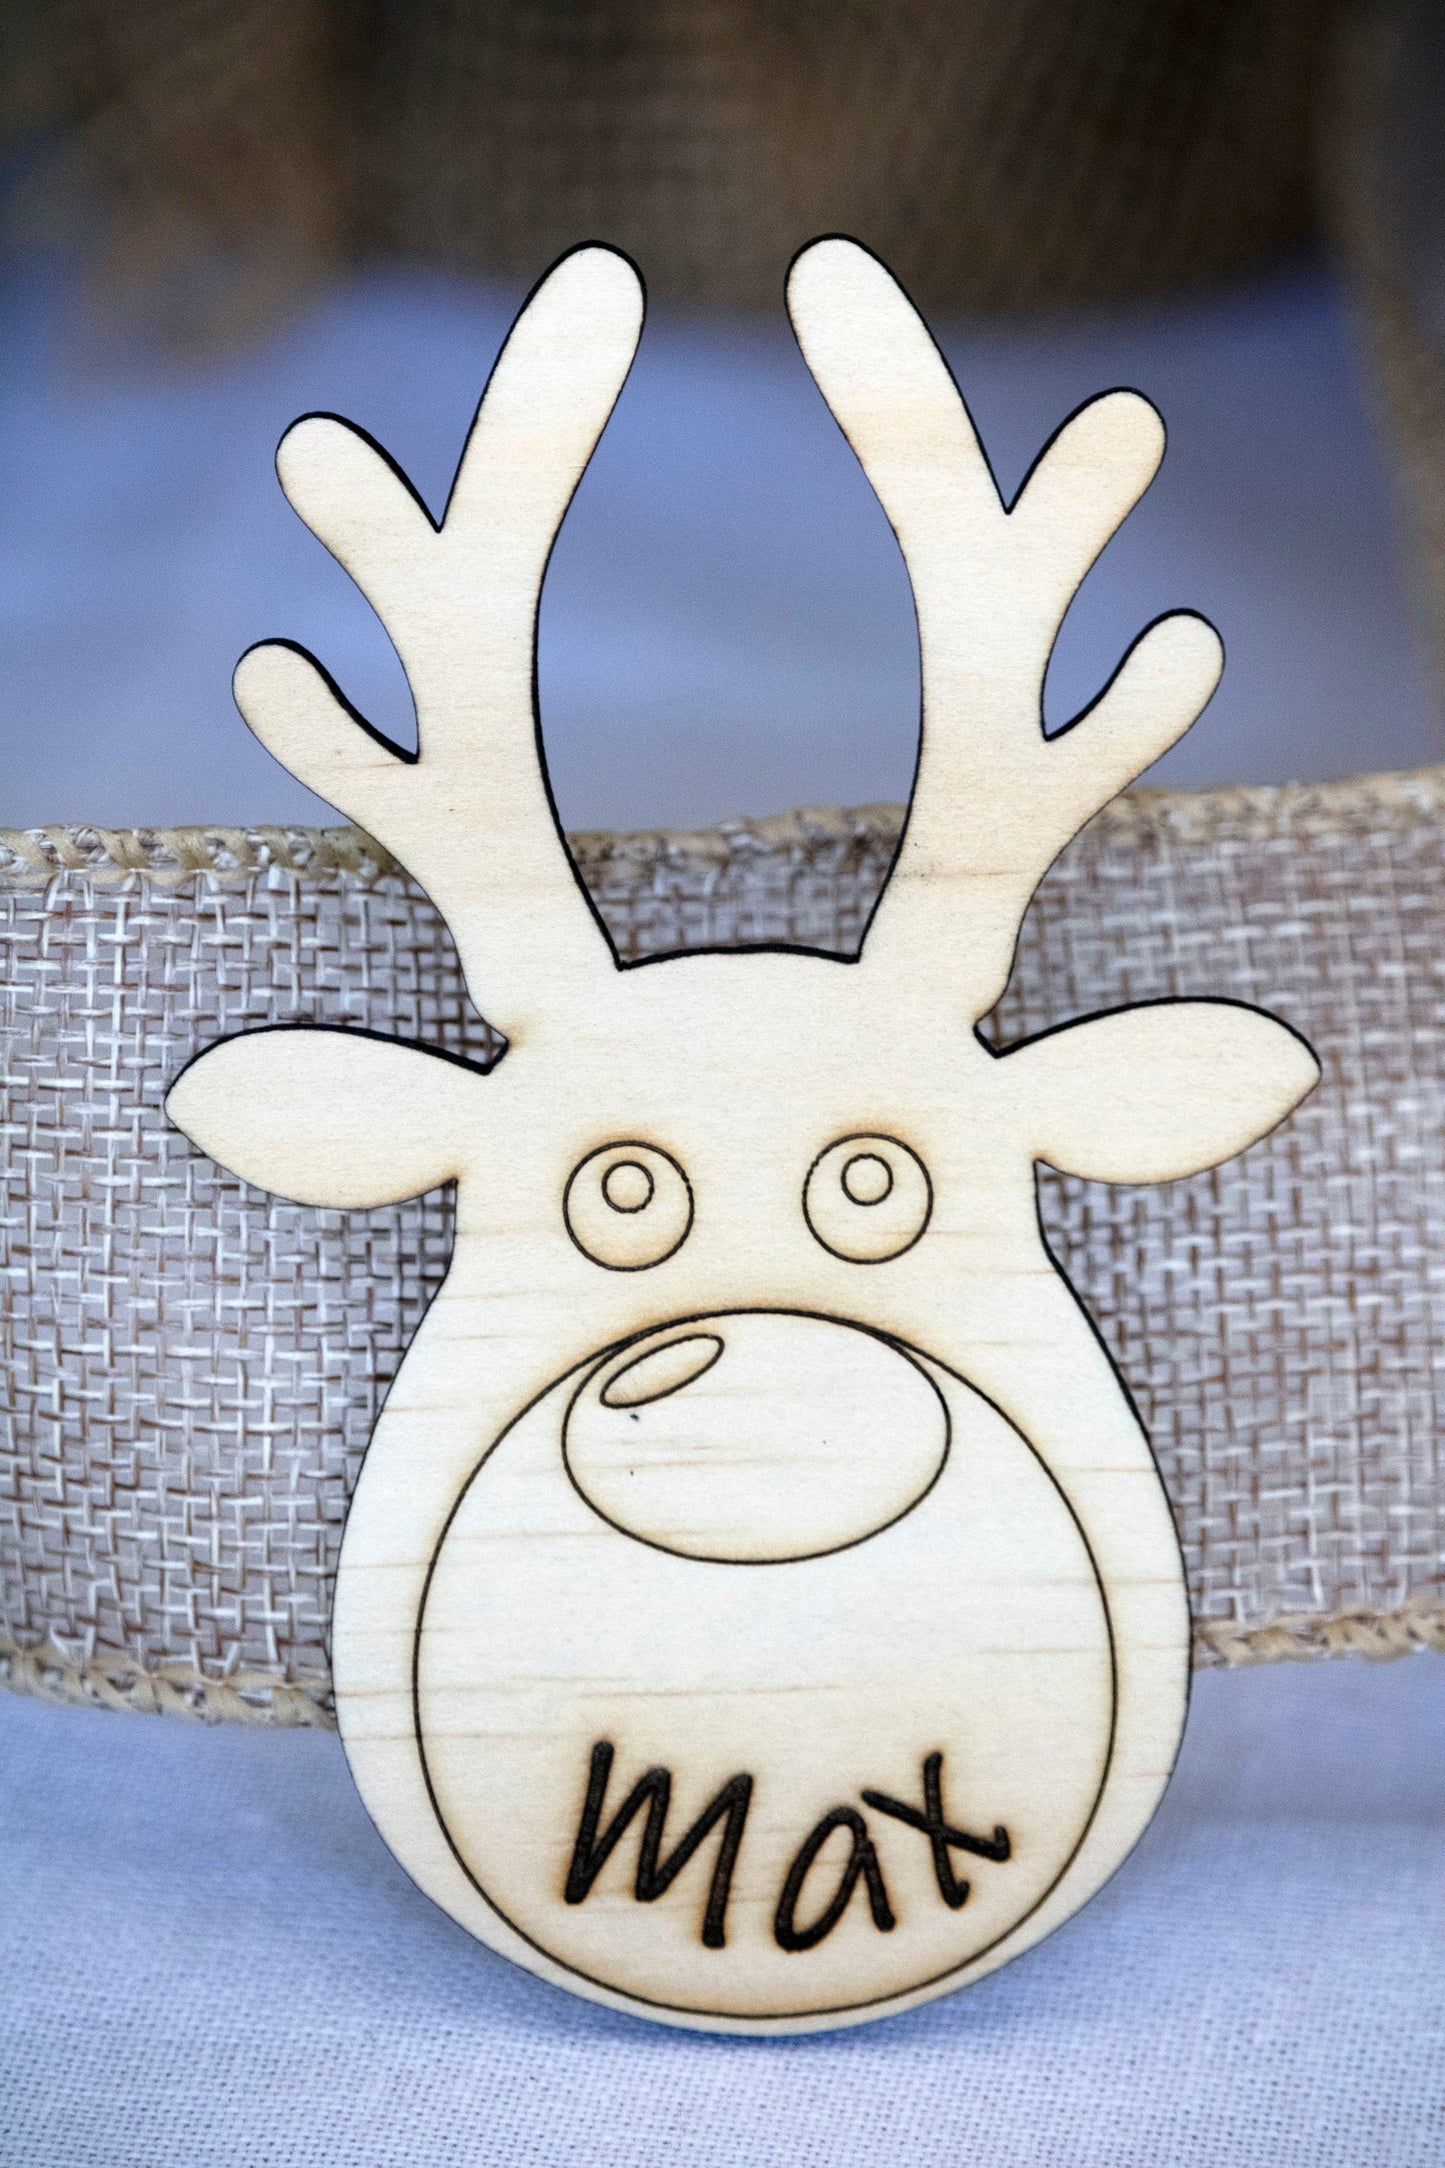 Christmas Place Settings ◽ Reindeer Table Decorations ◽ Name Place Cards ◽ Personalised Timber Place Cards